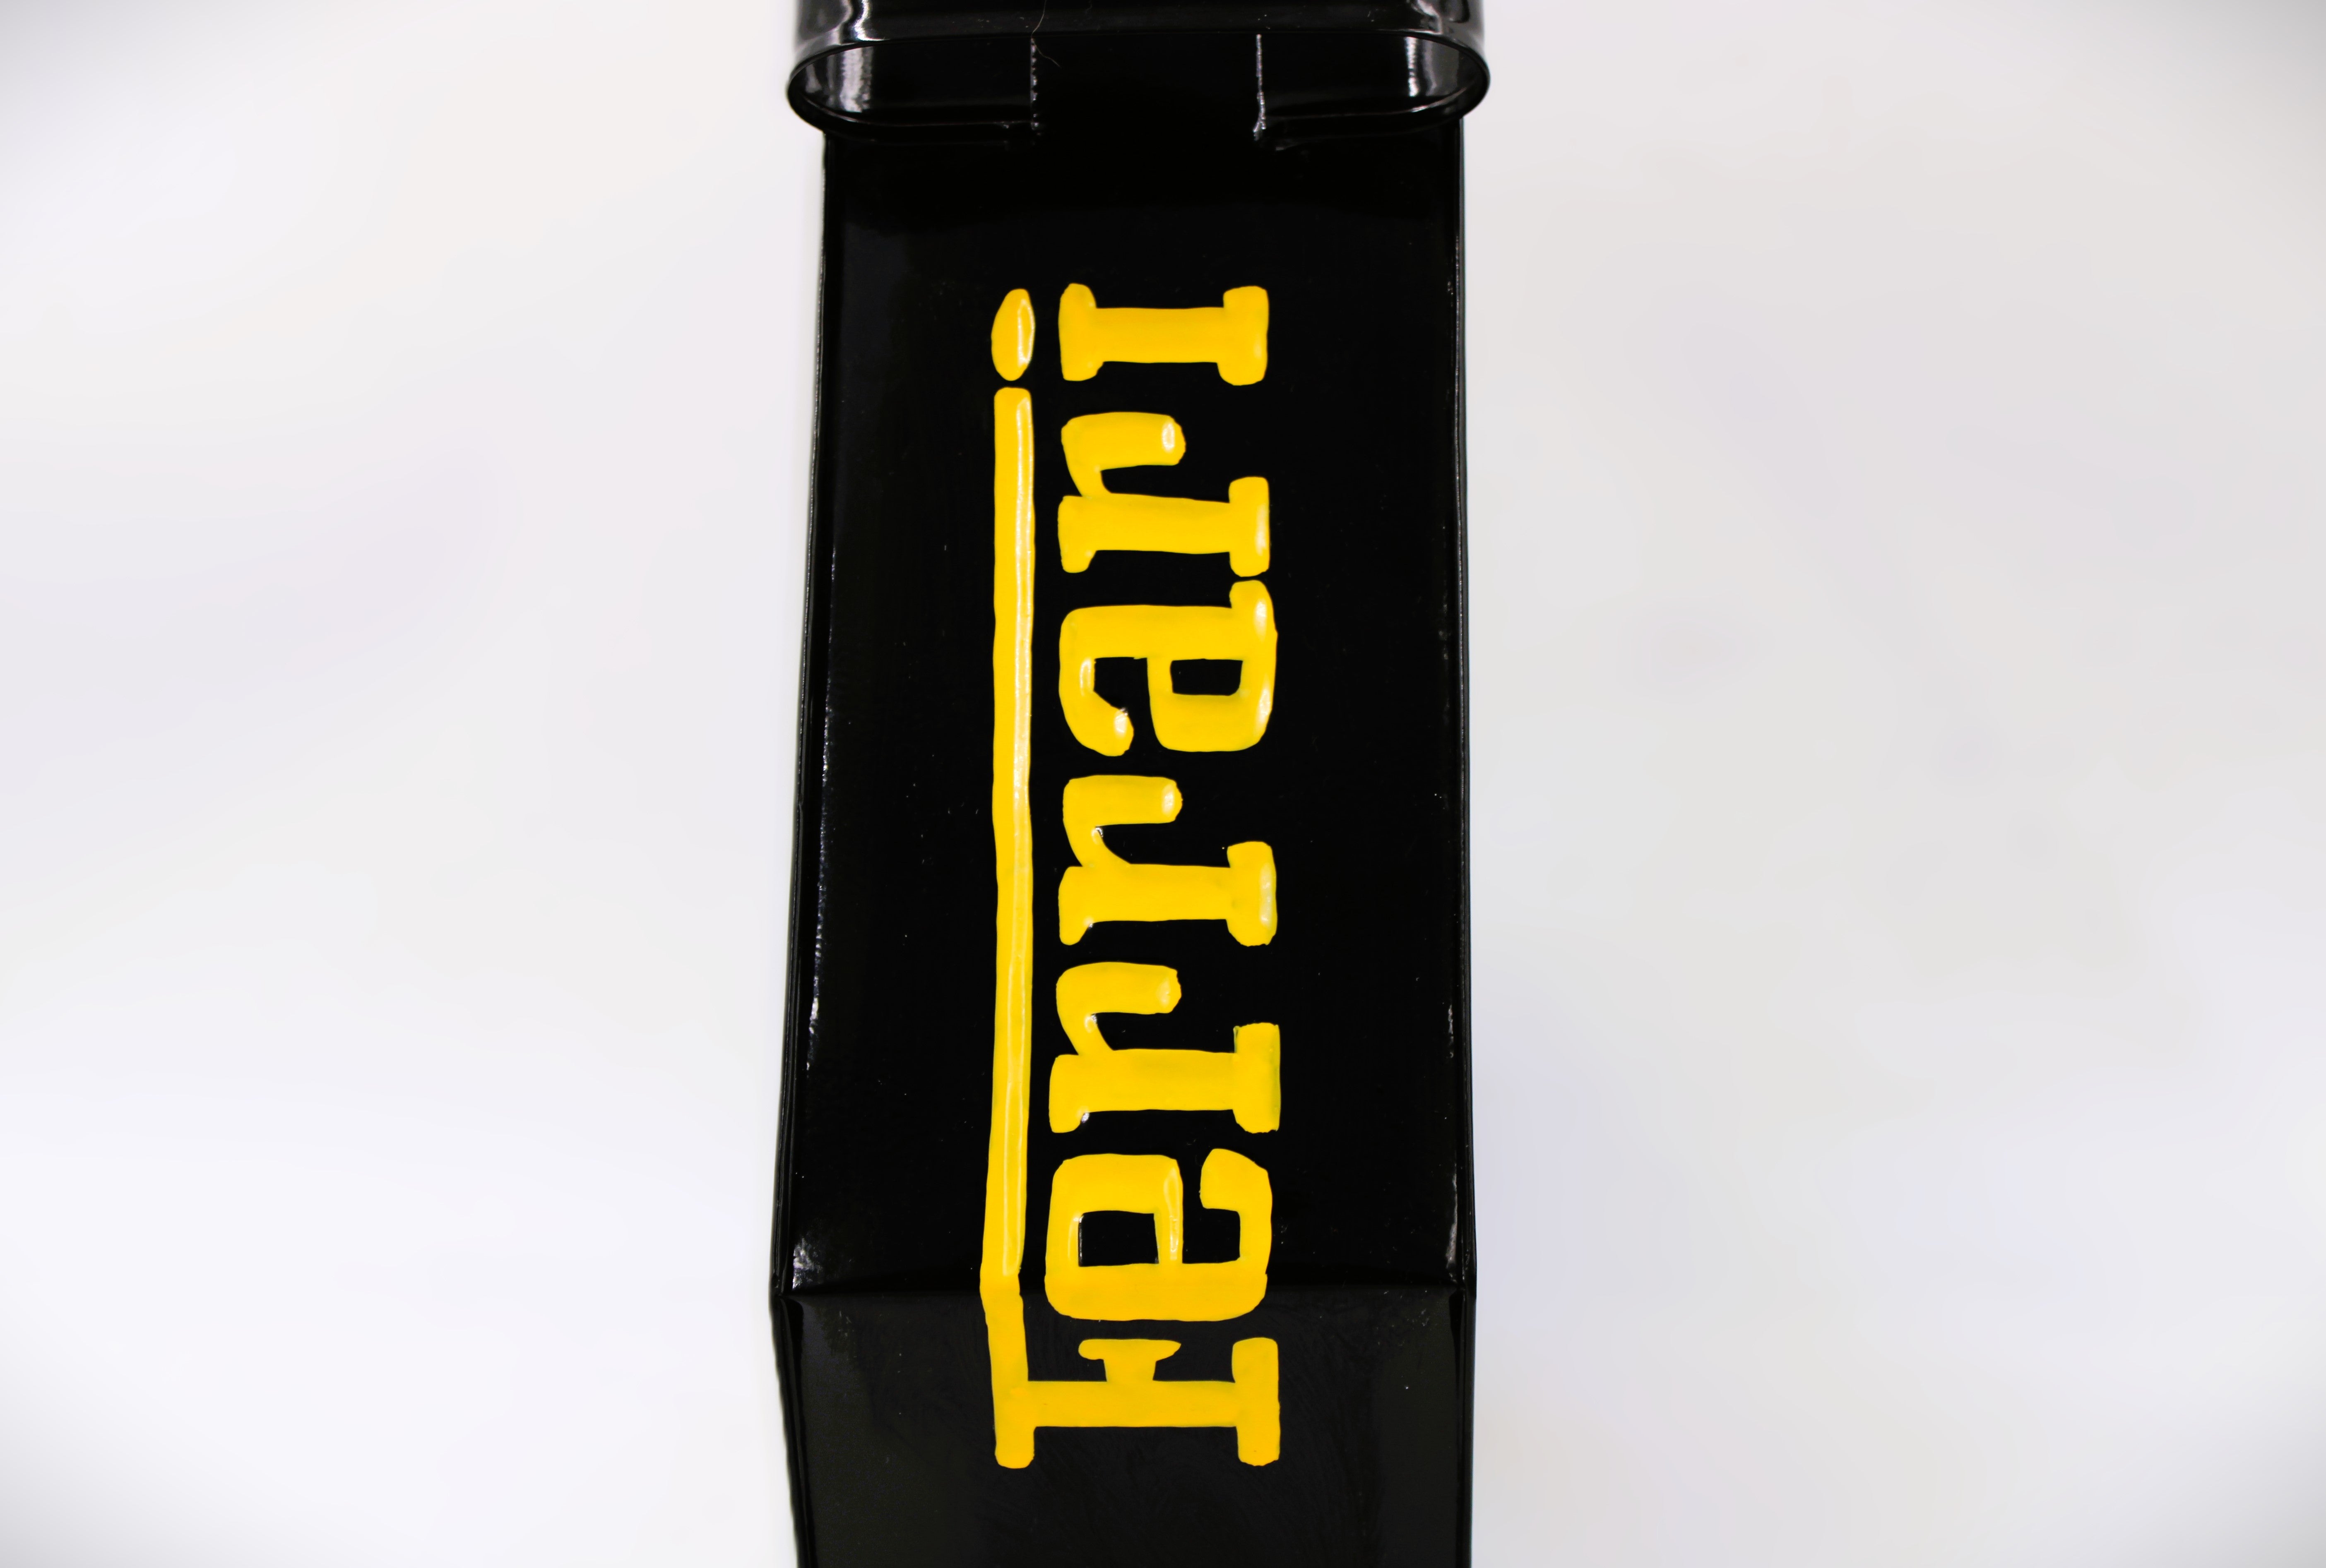 Side view of a black and yellow painted gas can with the Ferrari logo displayed.